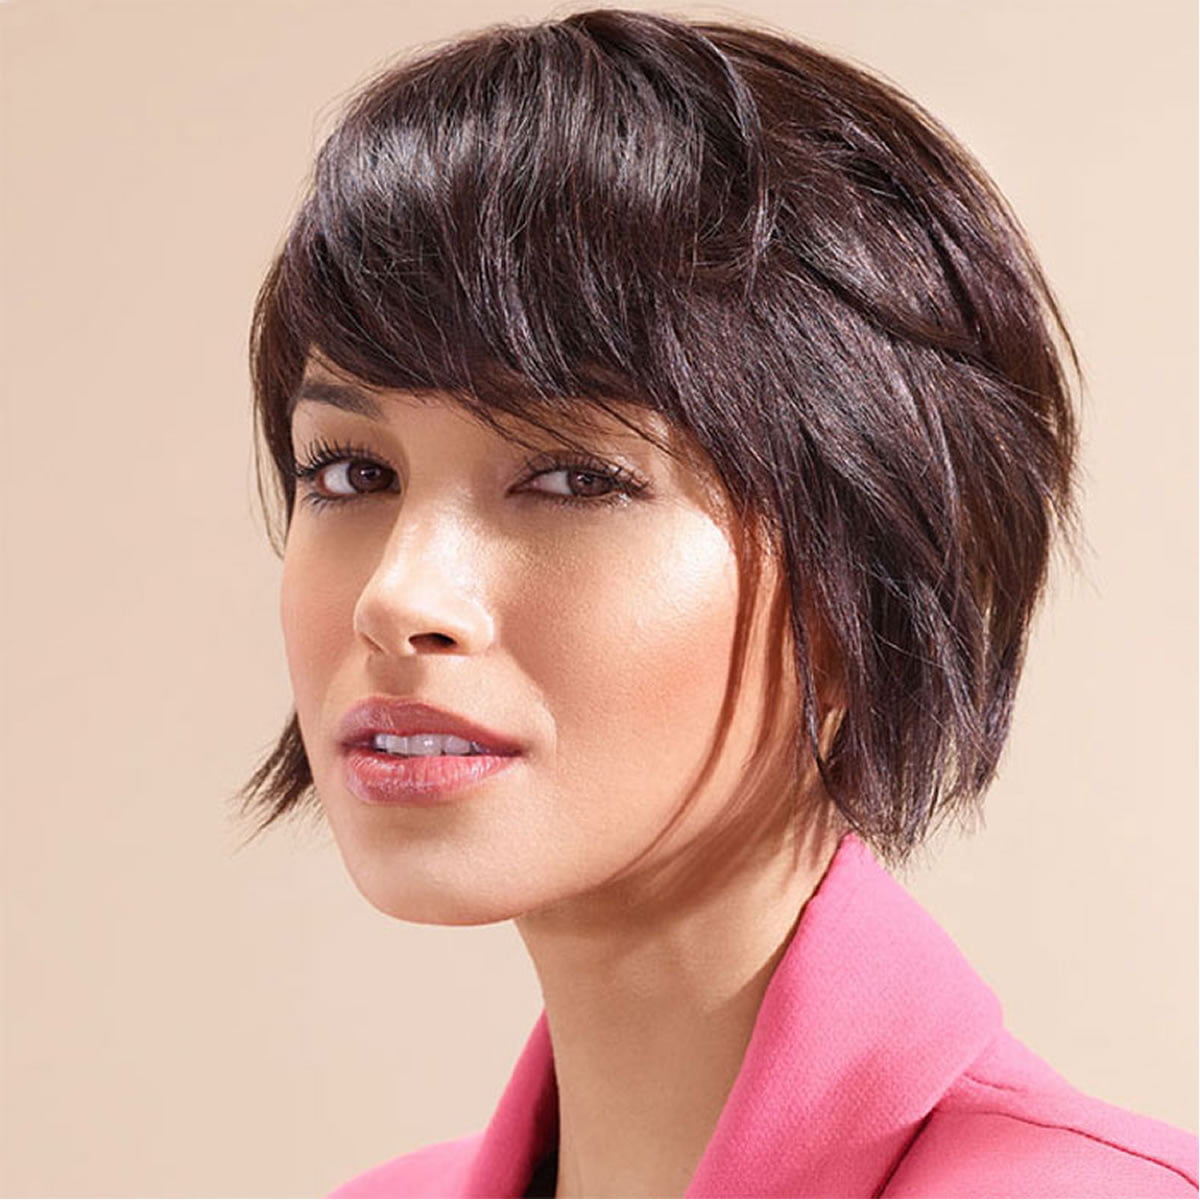 The Best 30 Short Bob Haircuts – 2018 Short Hairstyles for ...